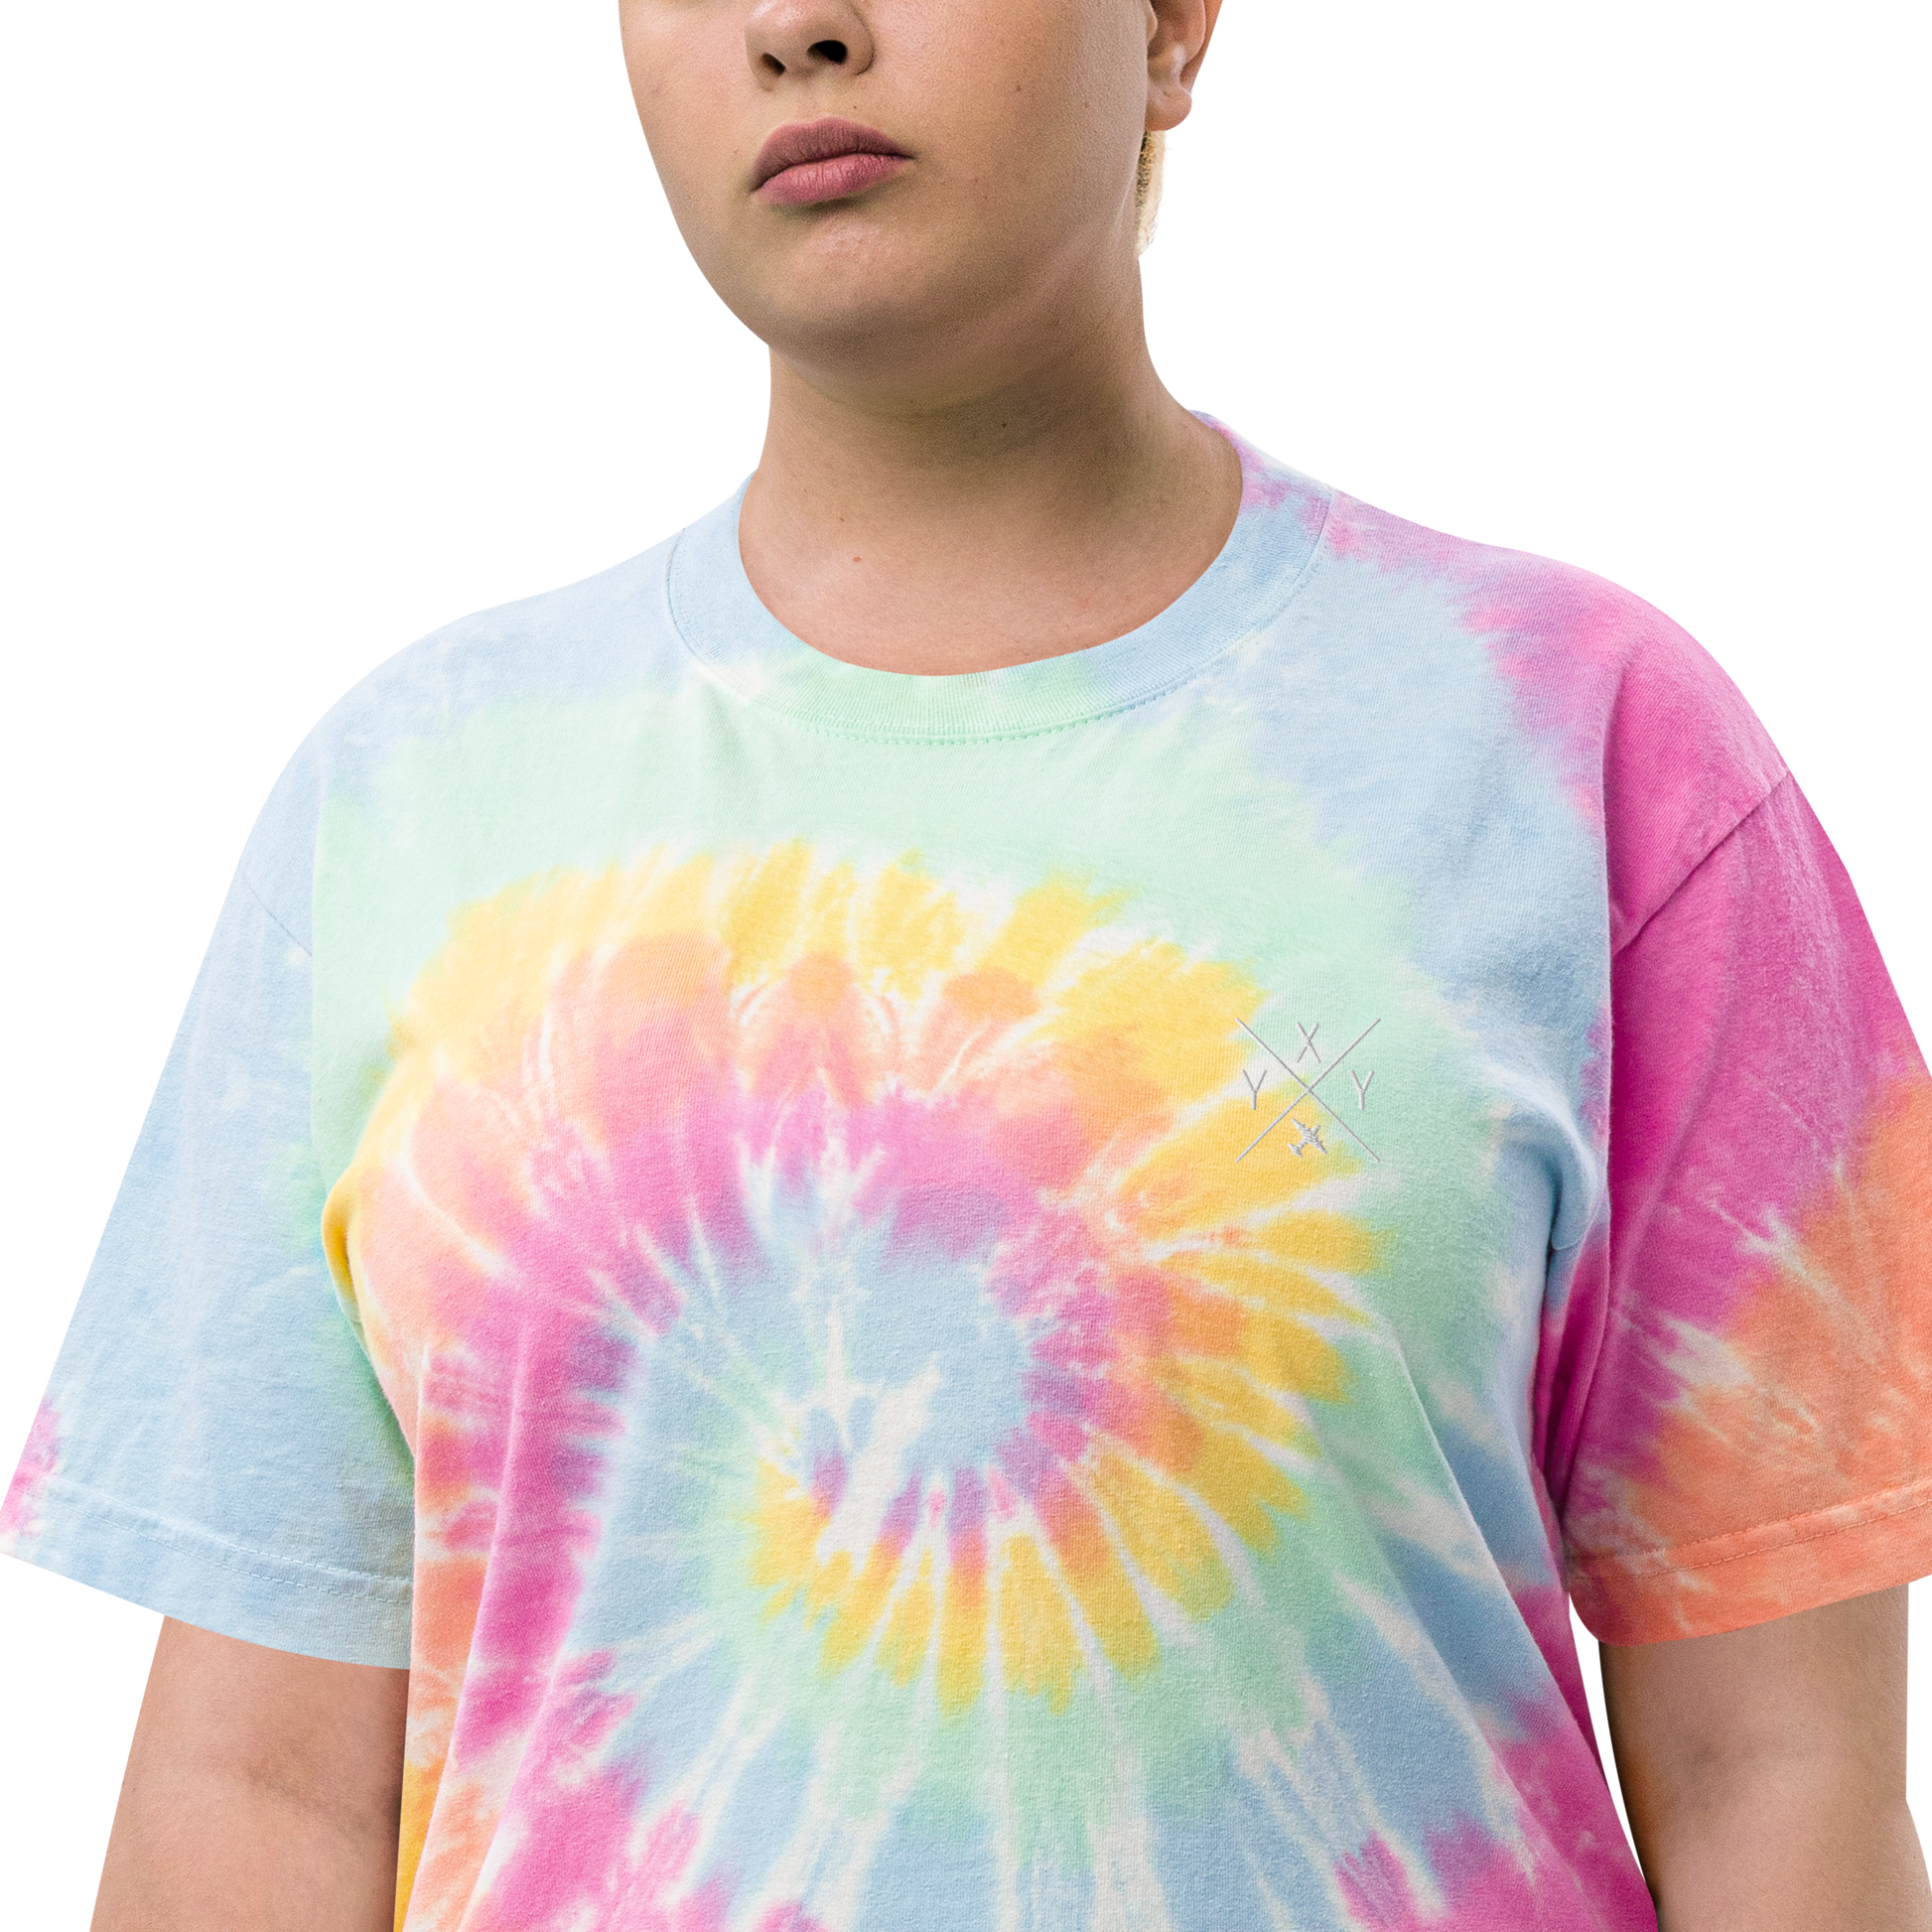 YHM Designs - YXY Whitehorse Oversized Tie-Dye T-Shirt - Crossed-X Design with Airport Code and Vintage Propliner - White Embroidery - Image 13